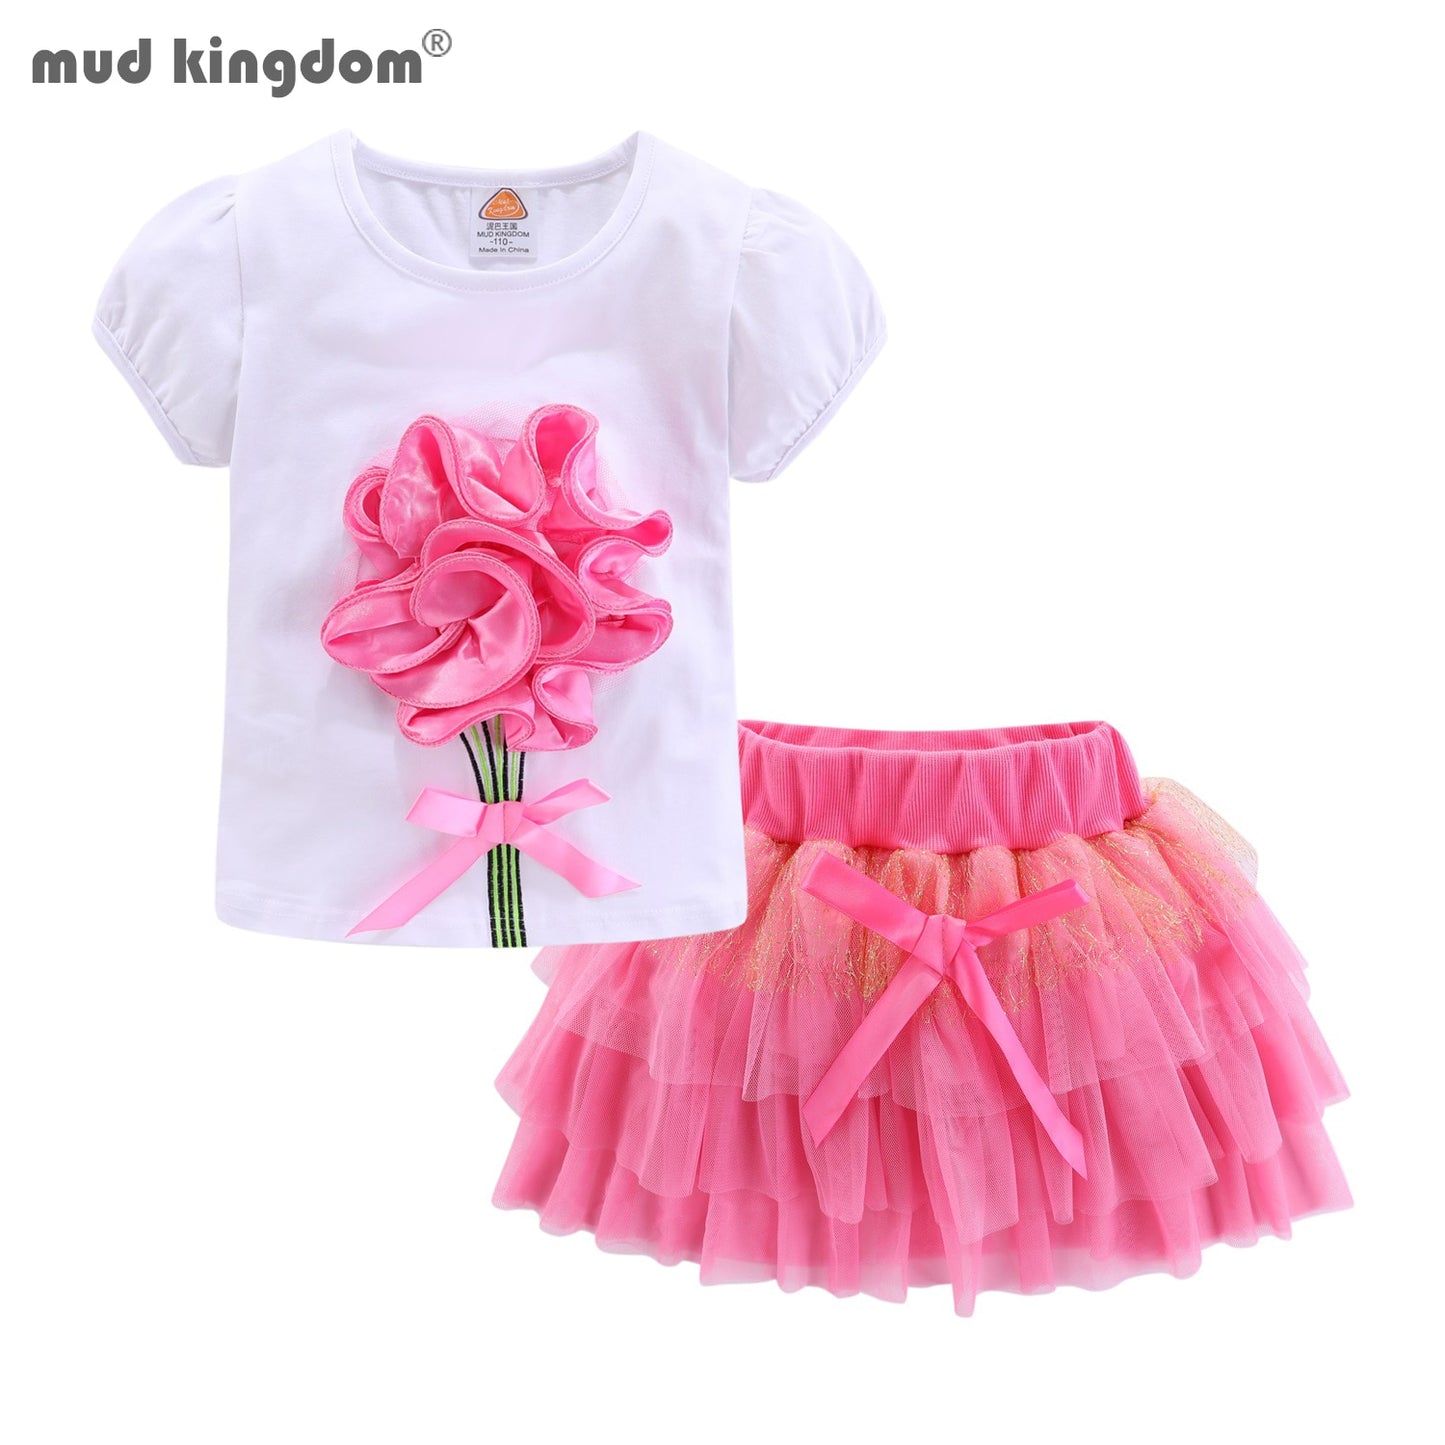 Mudkingdom Cute Girls Outfits Boutique 3D Flower Lace Bow Tulle Tutu Skirt Sets for Toddler Girl Clothes Suit Summer Costumes